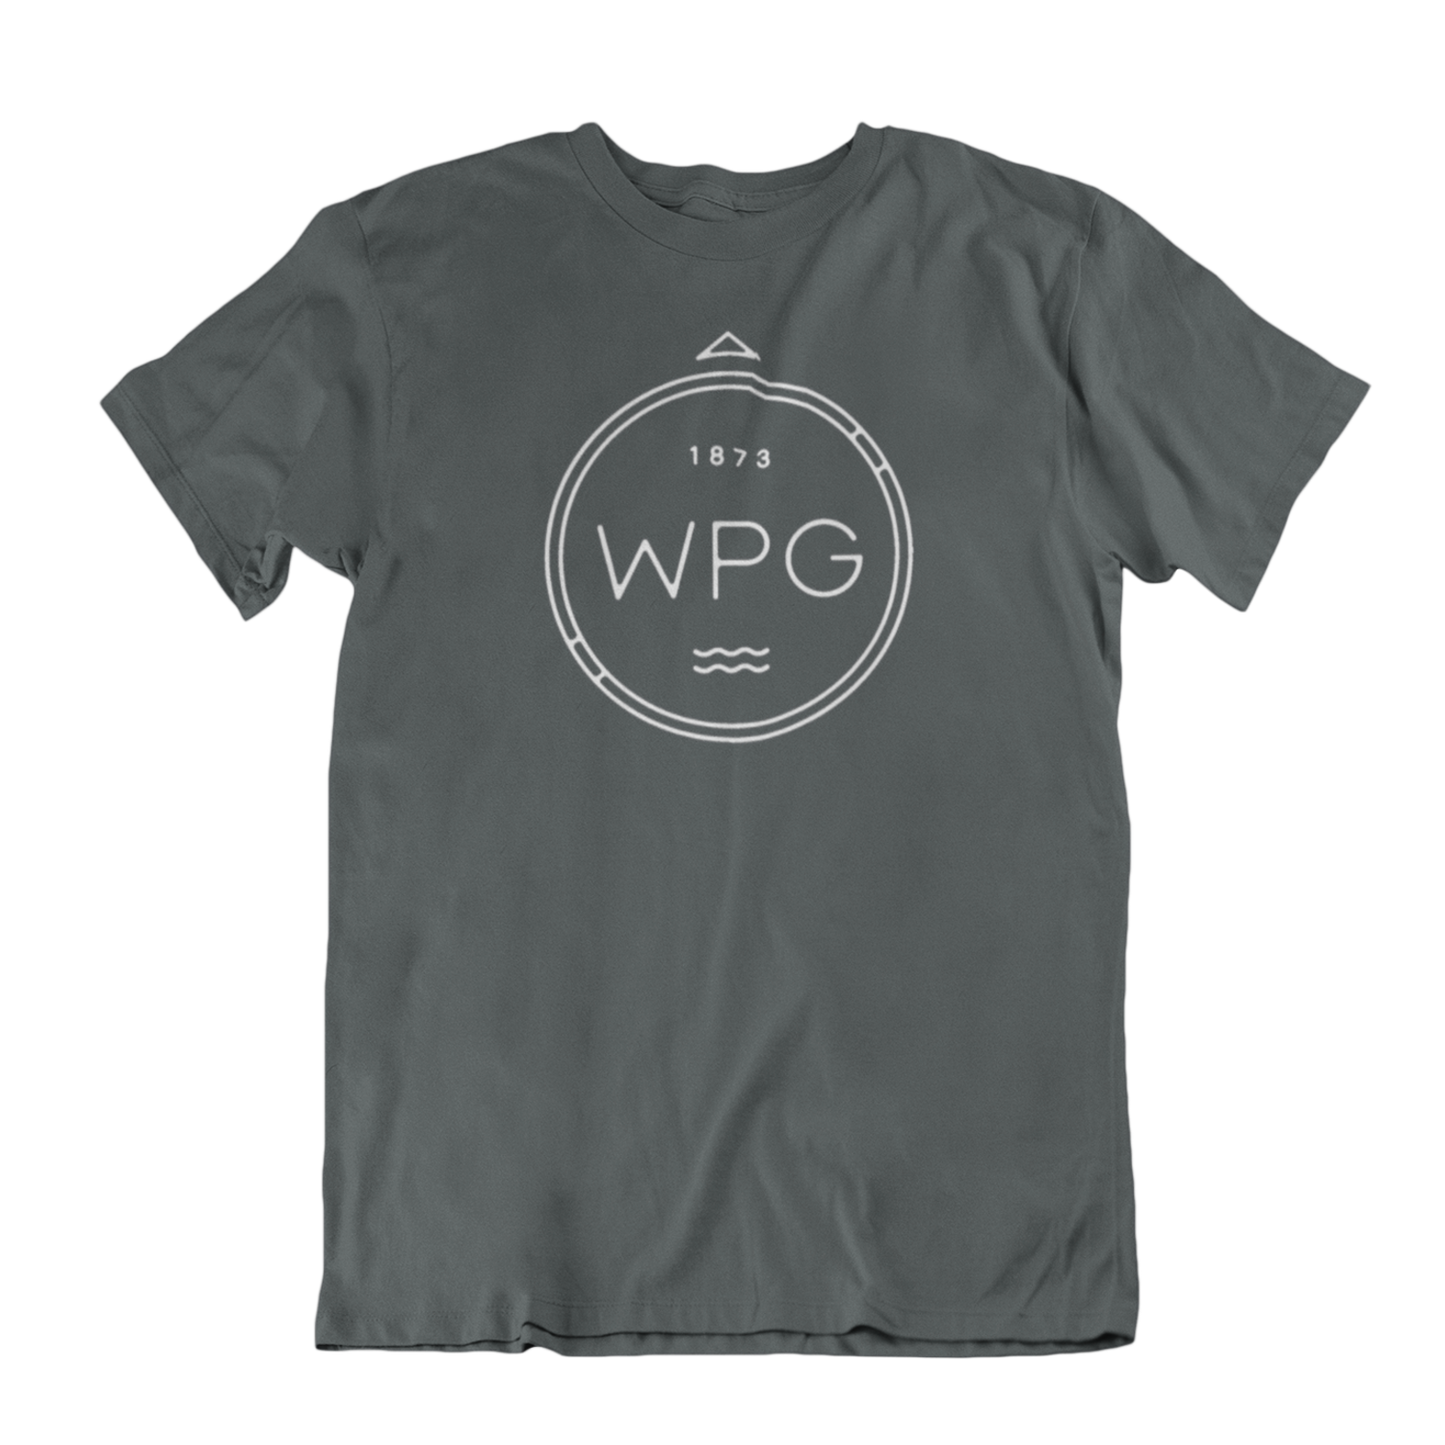 WPG Compass Tee | White on Charcoal